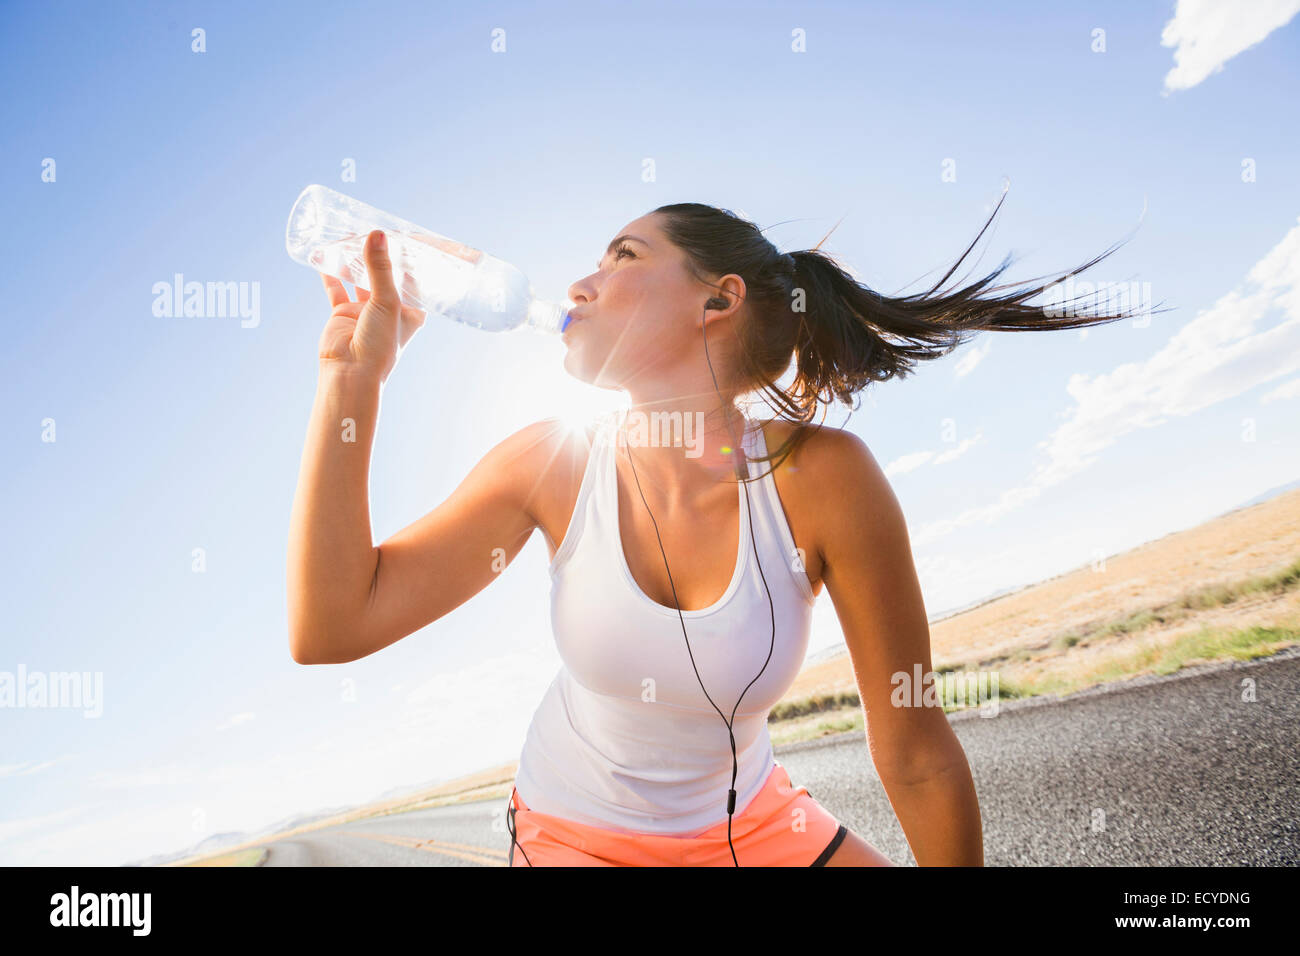 Caucasian runner drinking water bottle on remote road Banque D'Images